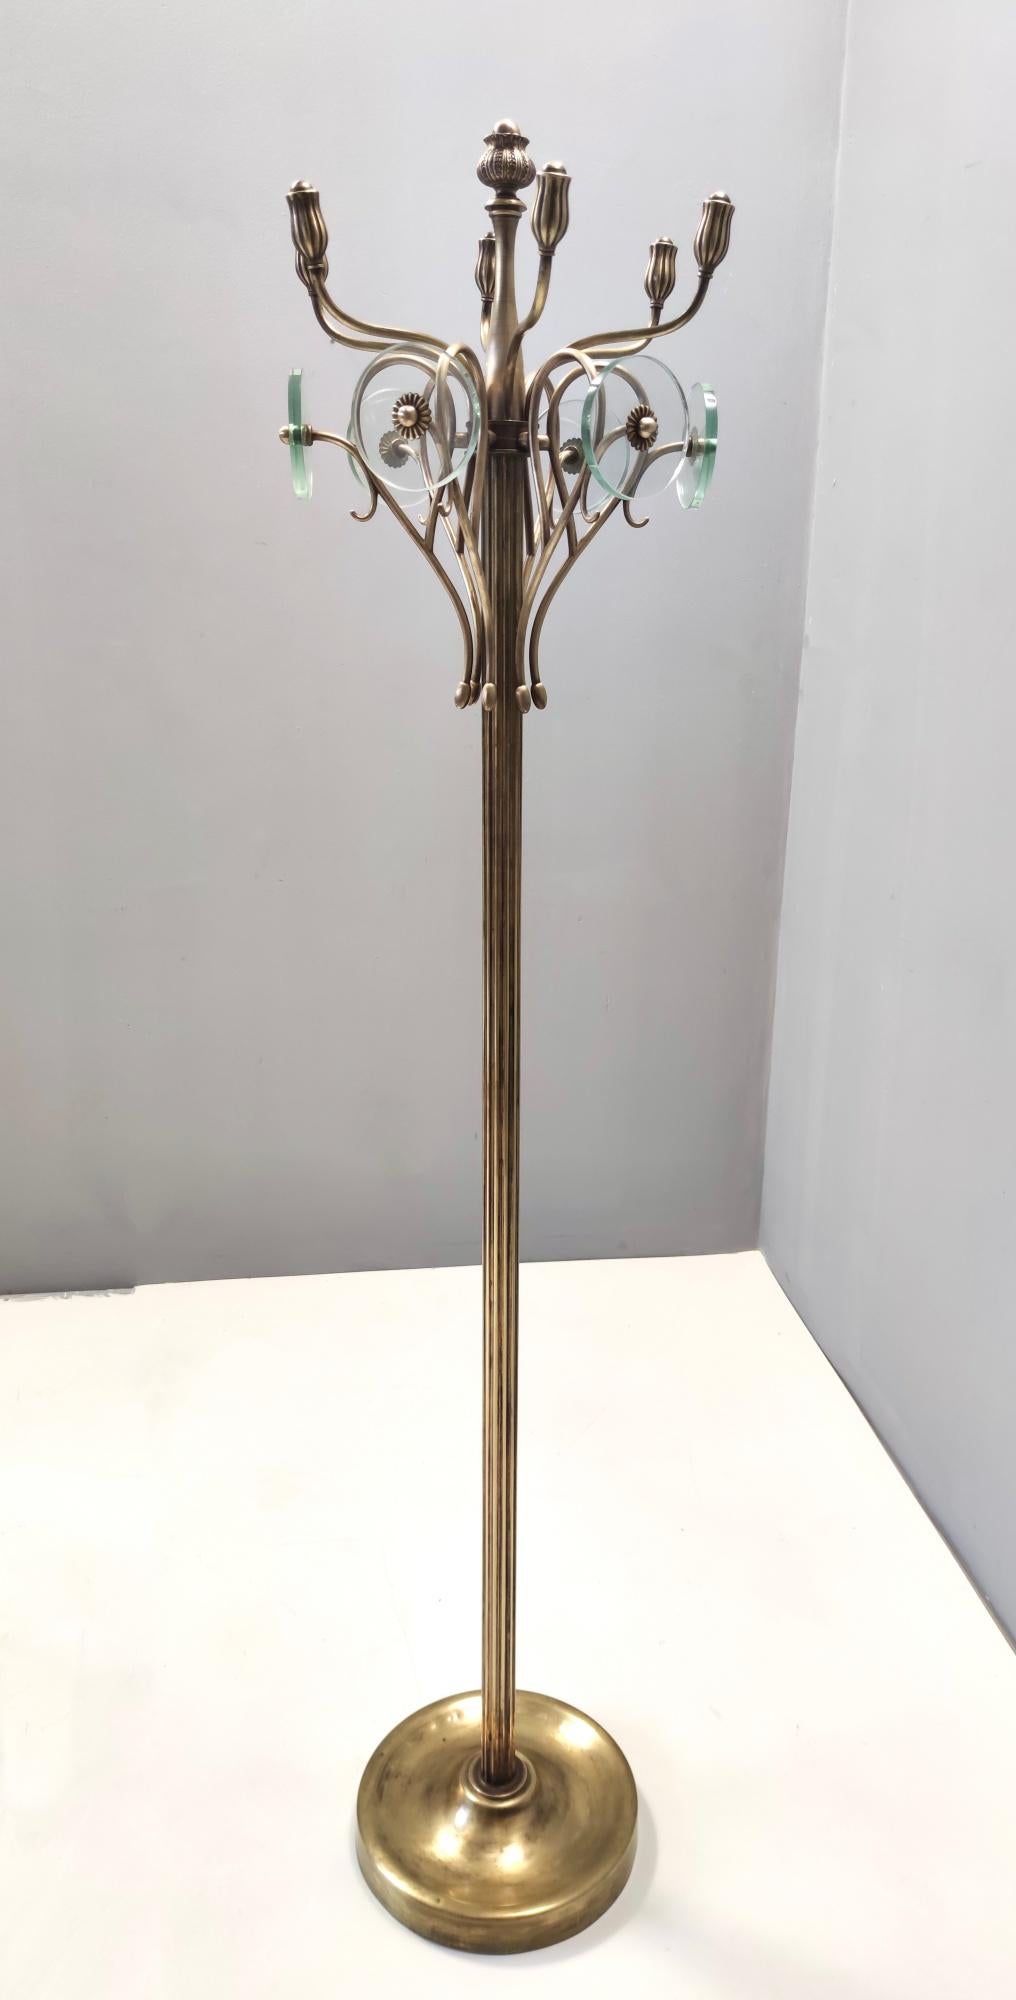 Mid-20th Century Revolving Brass and Glass Coat Rack Ascribable to Fontana Arte, Italy For Sale